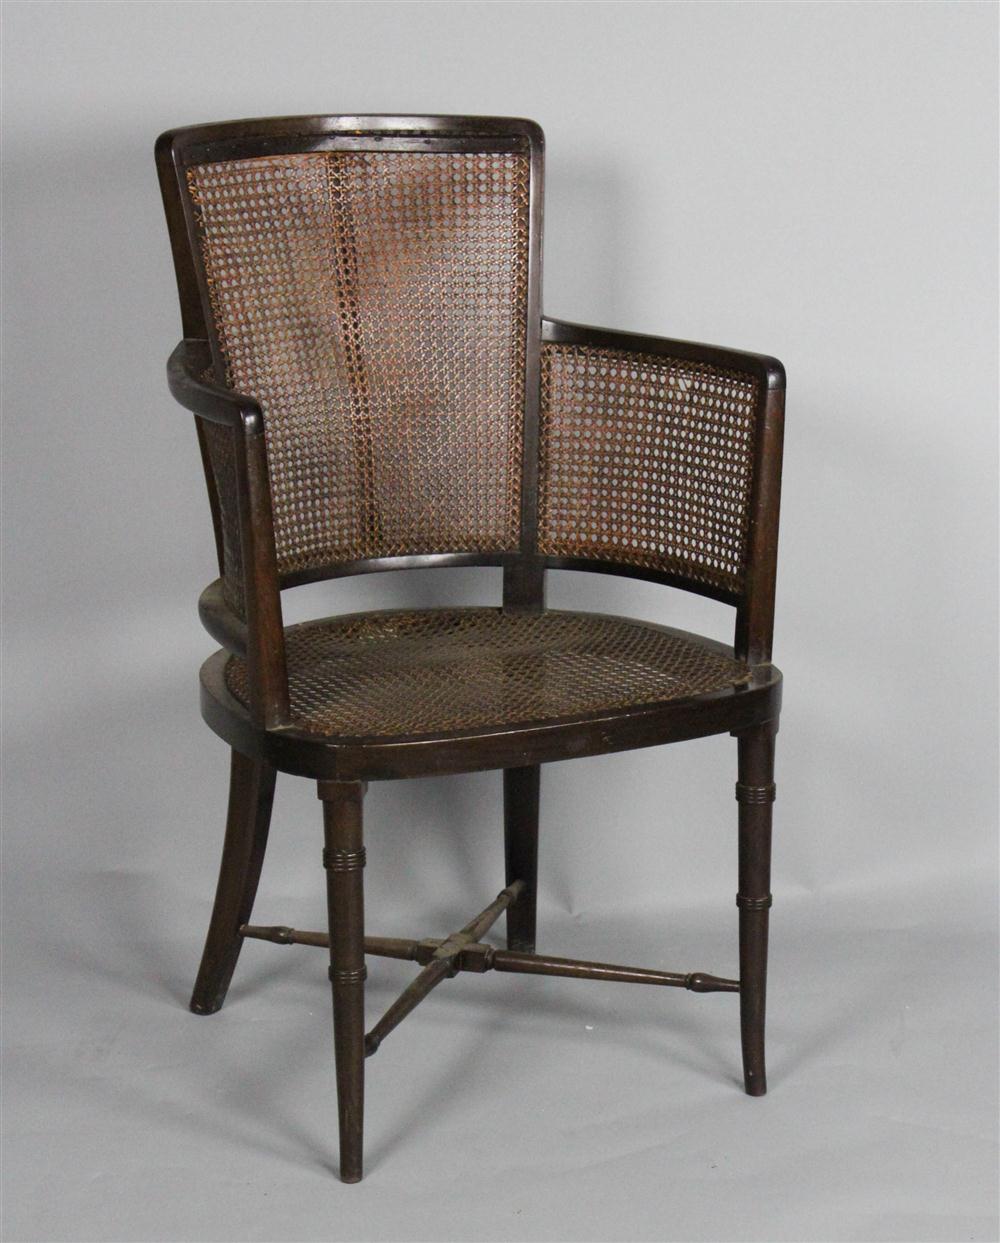 CANED ARM CHAIR AND COLLAPSIBLE TWO-TIER